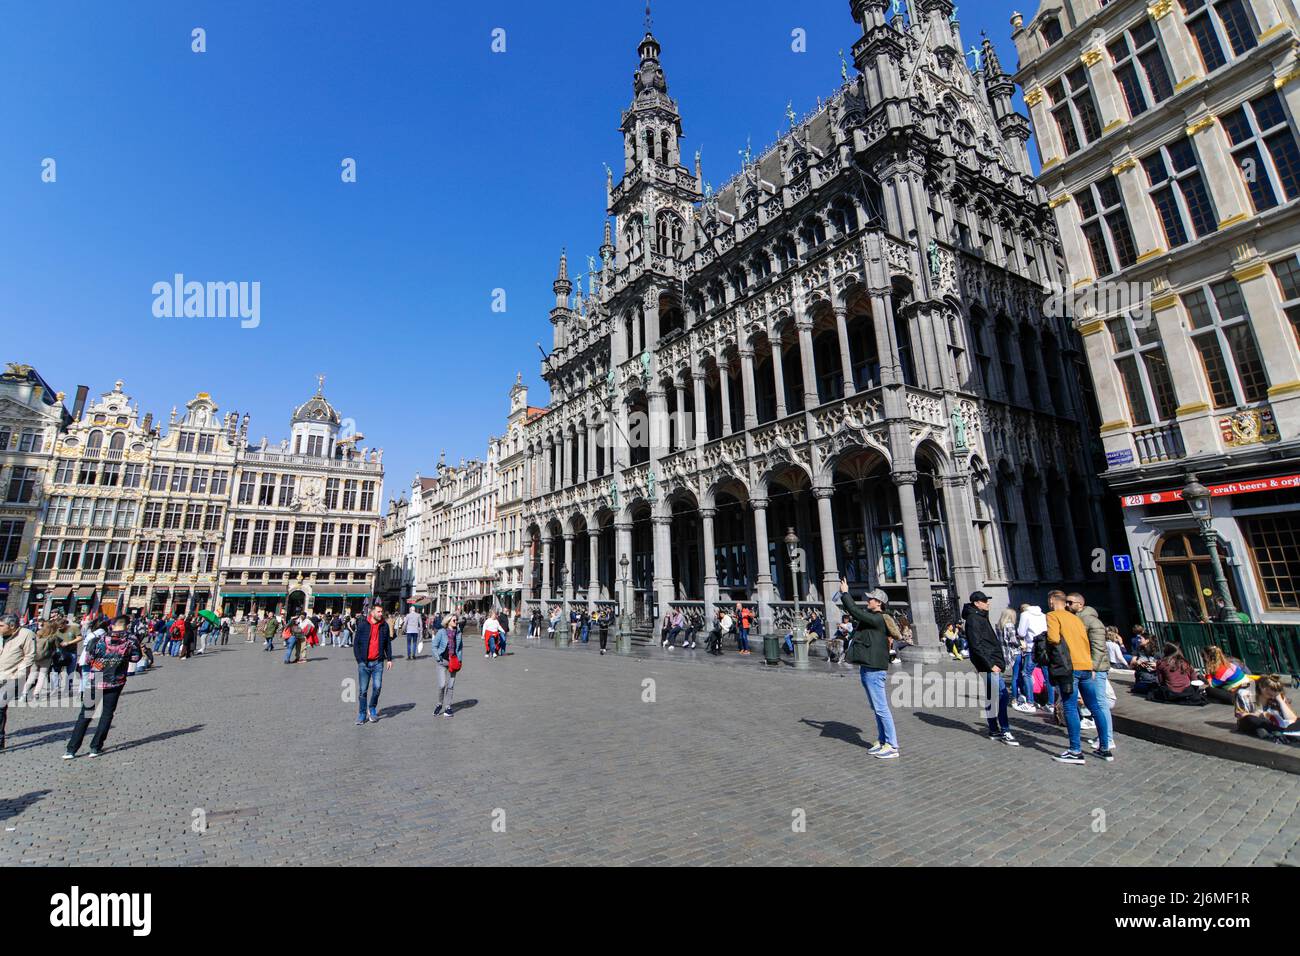 Brussels, Belgium - March 25, 2021: The Grand Place of Brussels, the city centre. Stock Photo